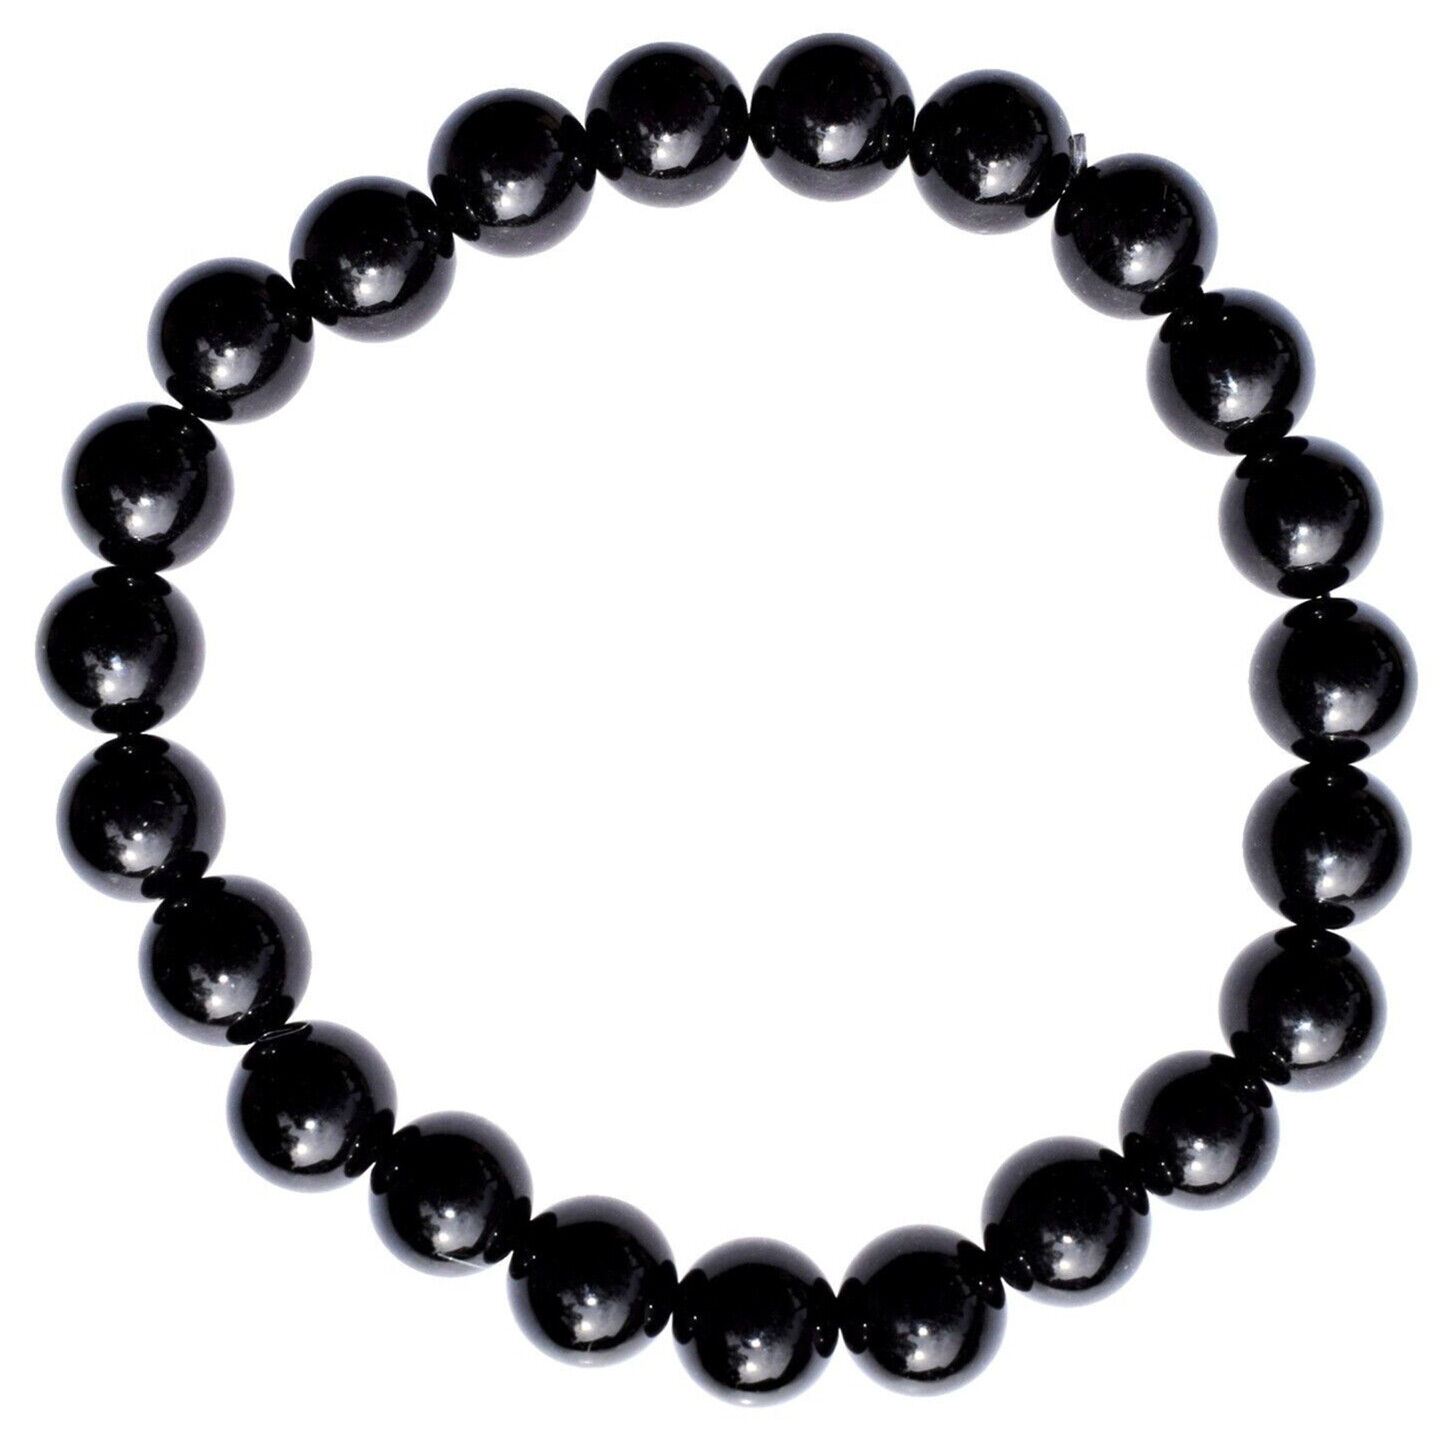 CHARGED Black Obsidian 8mm Crystal Stretchy Bracelet + Baby Selenite Puffy Heart